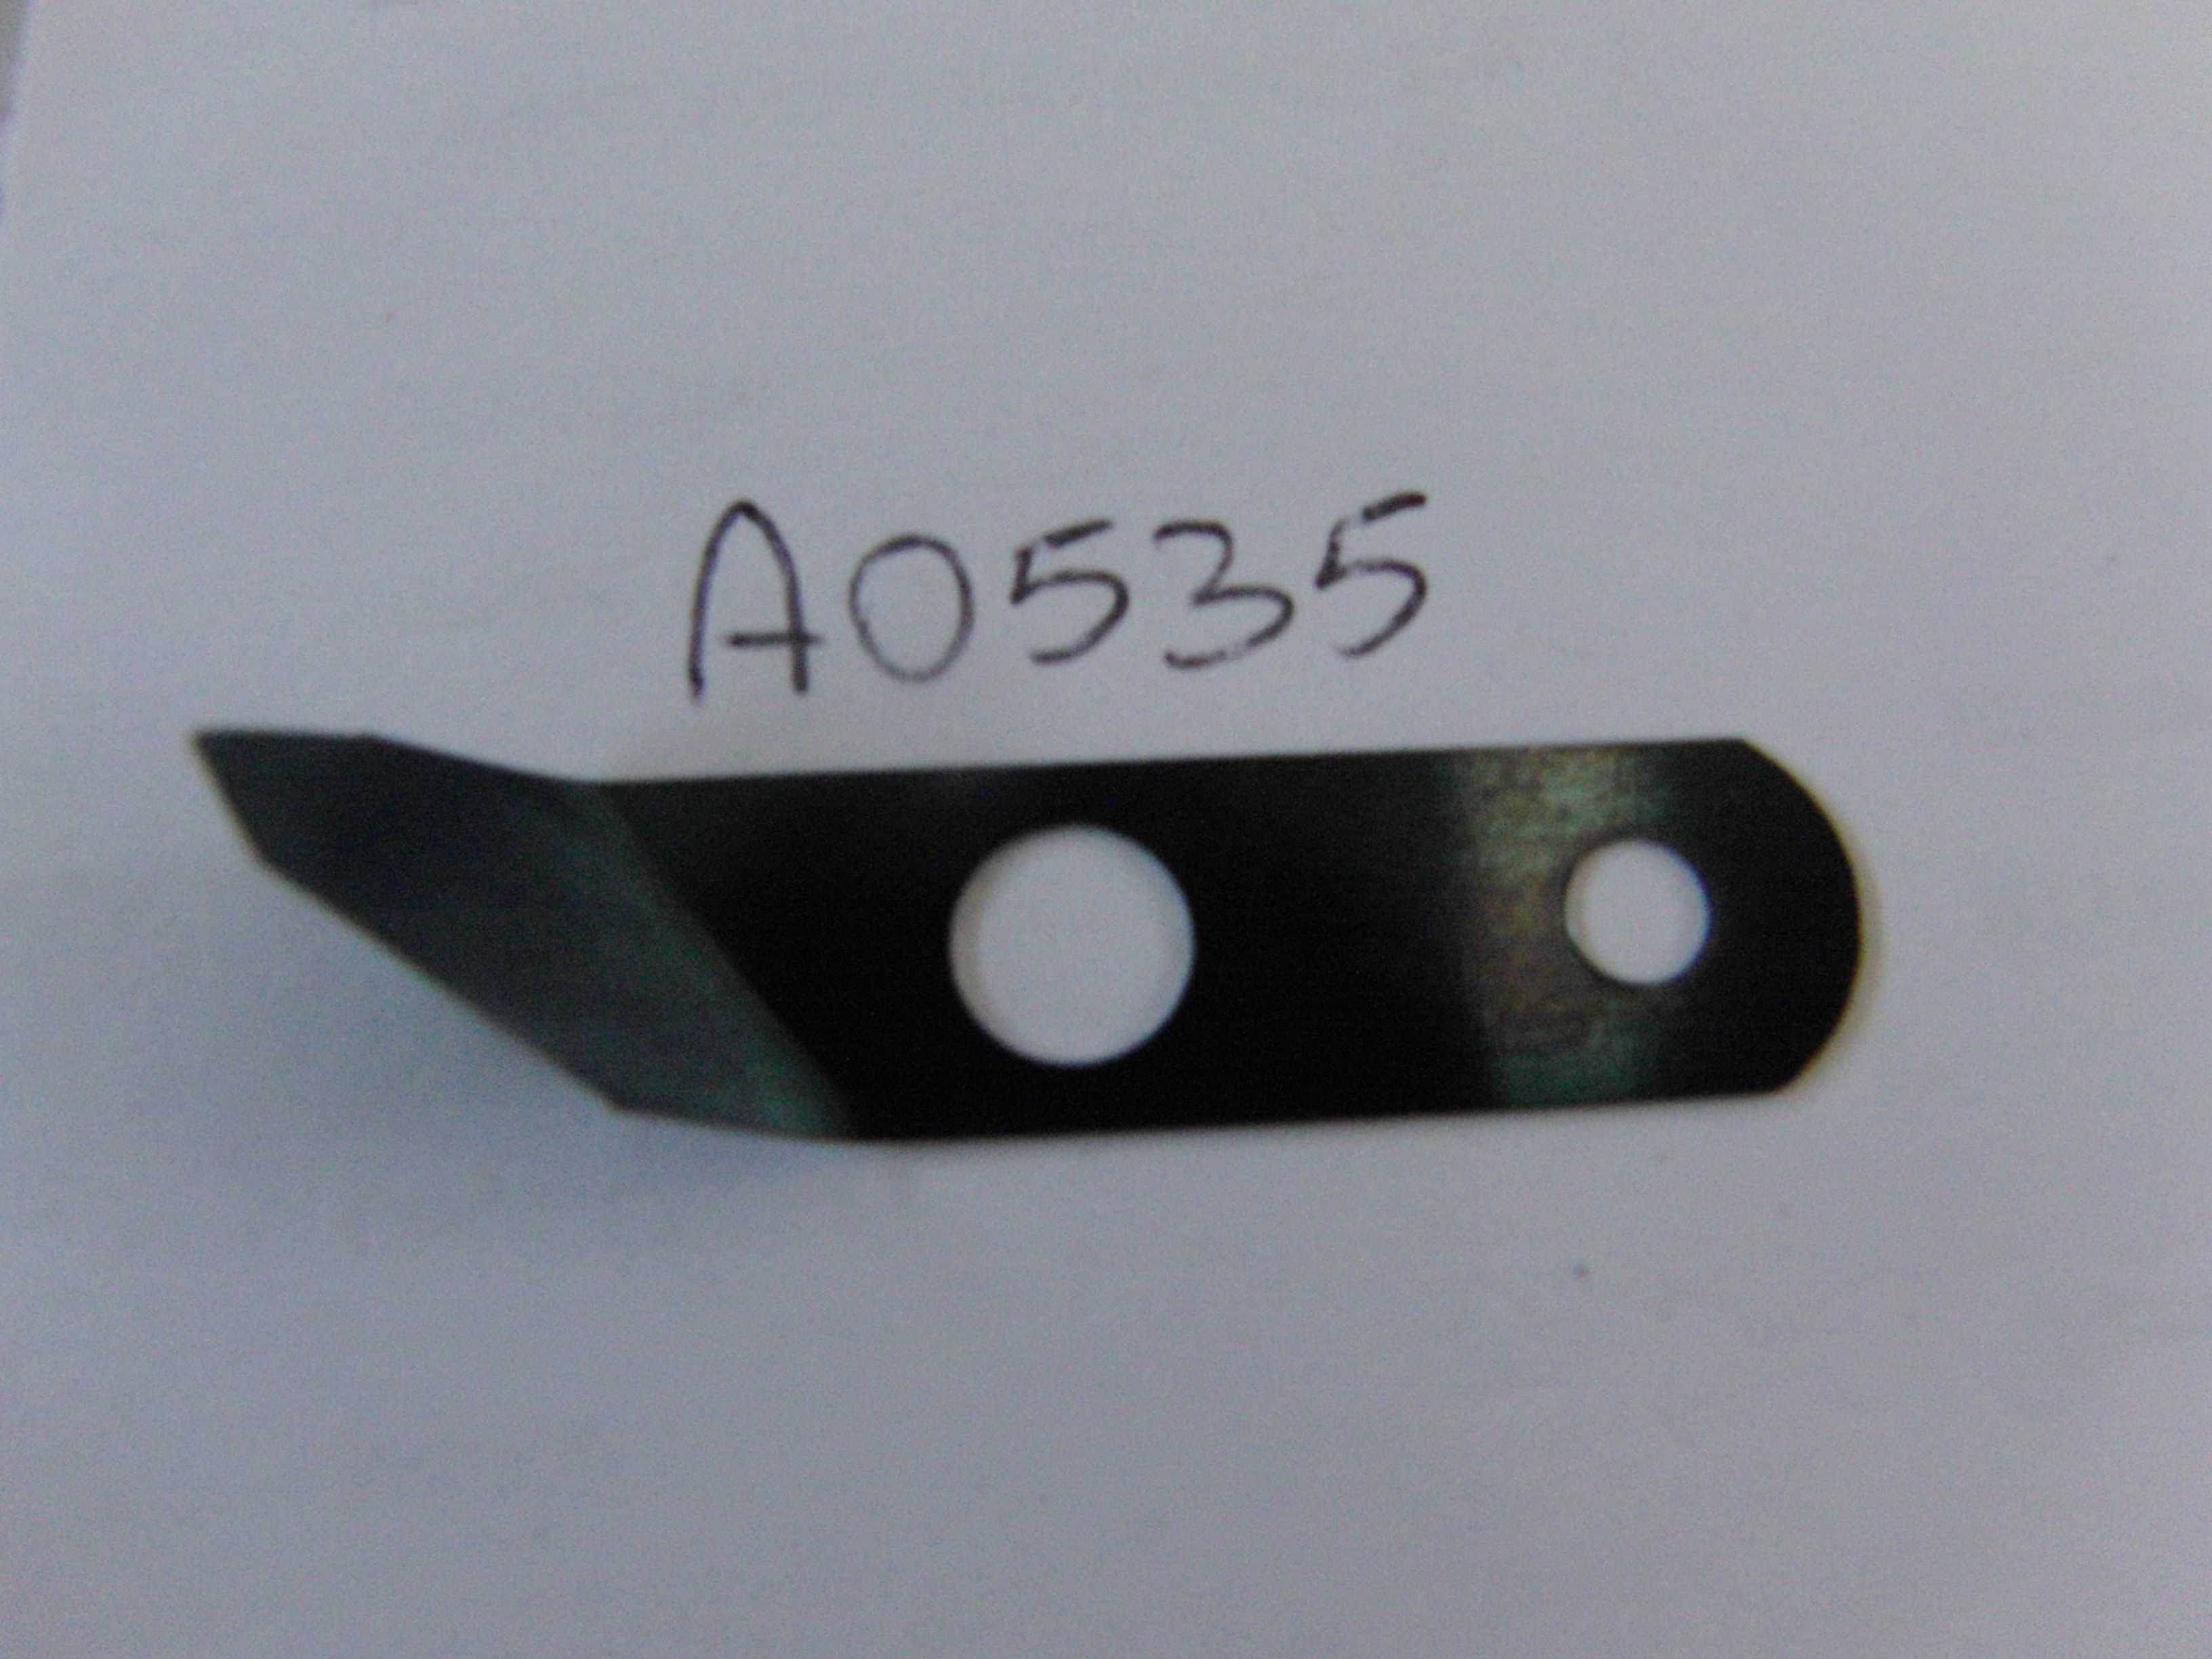 LOWER SPIRAL STOP CONTACT BLADE